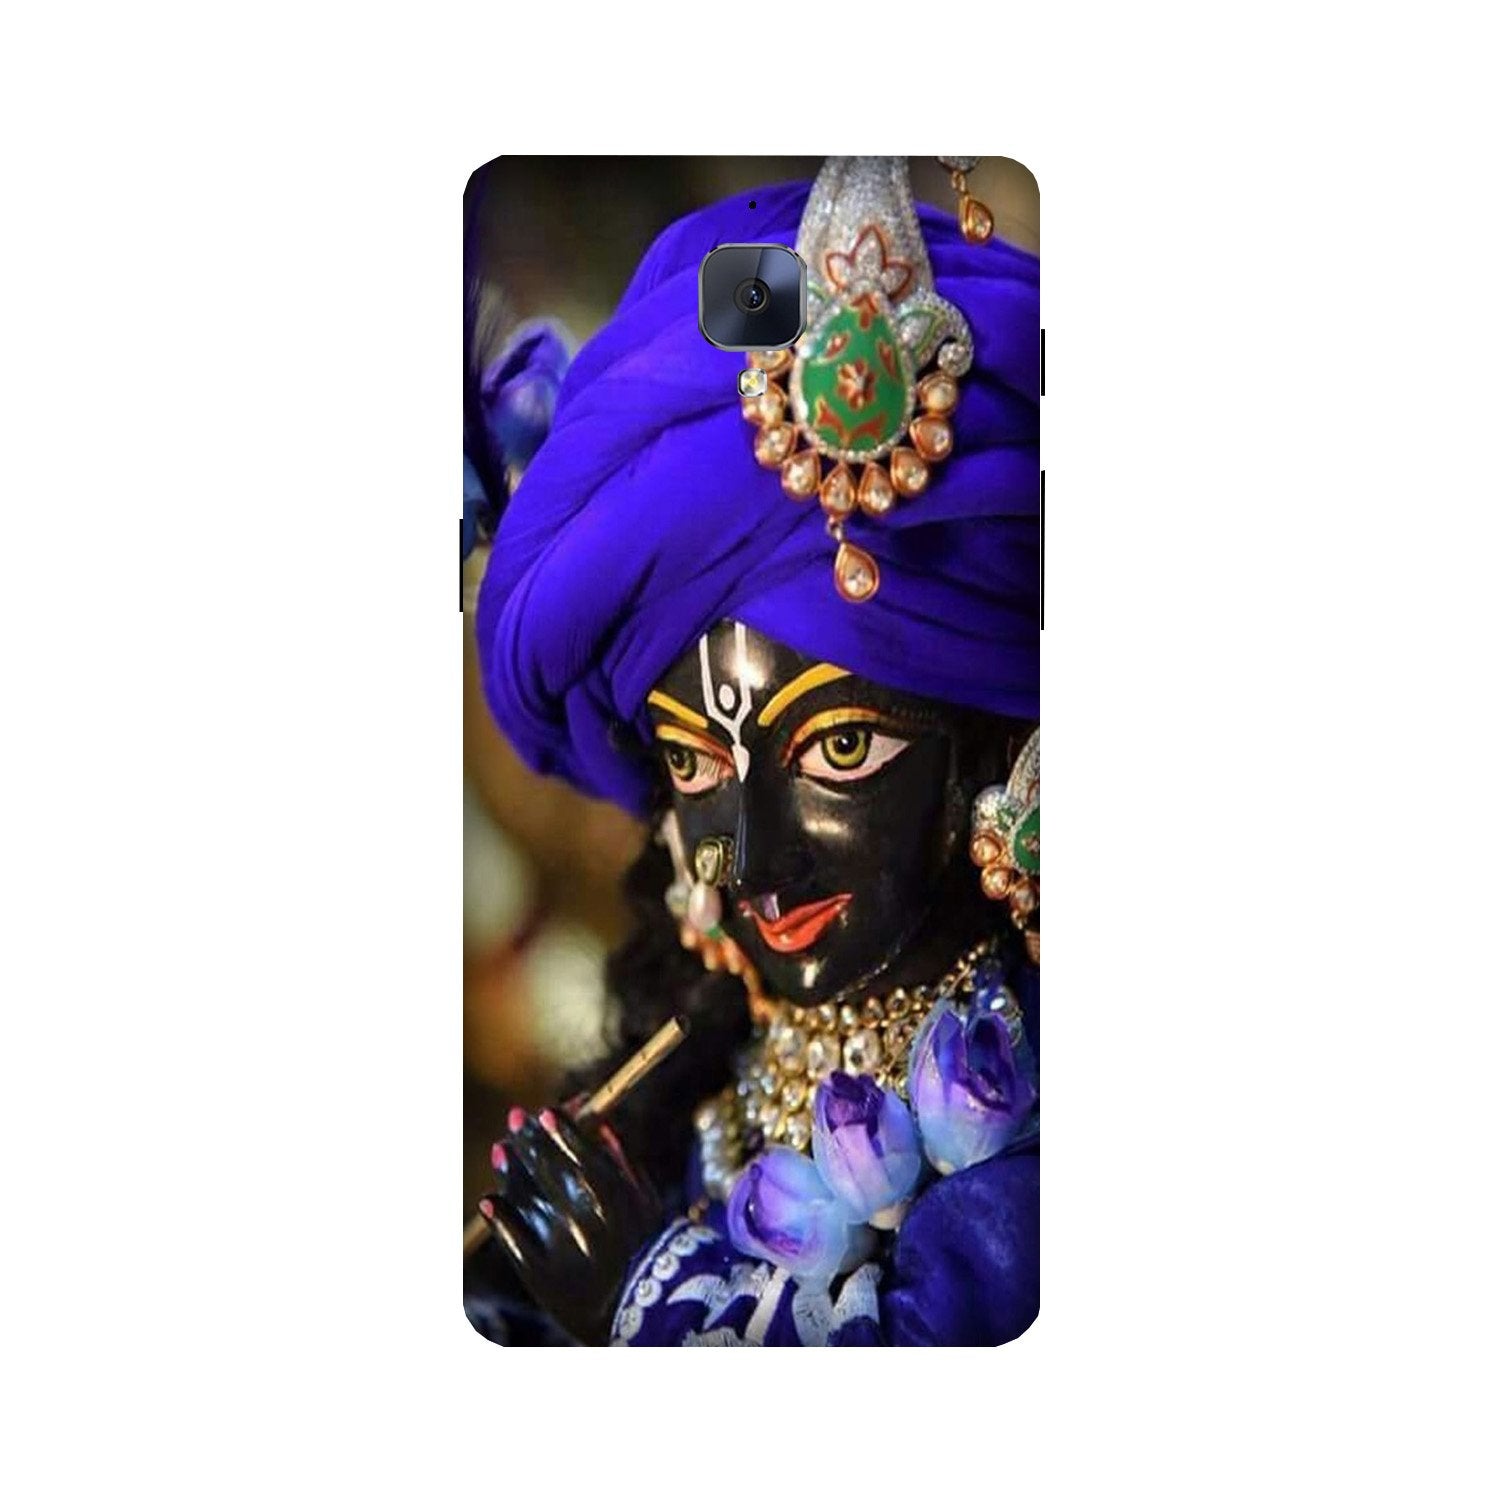 Lord Krishna4 Case for OnePlus 3/ 3T